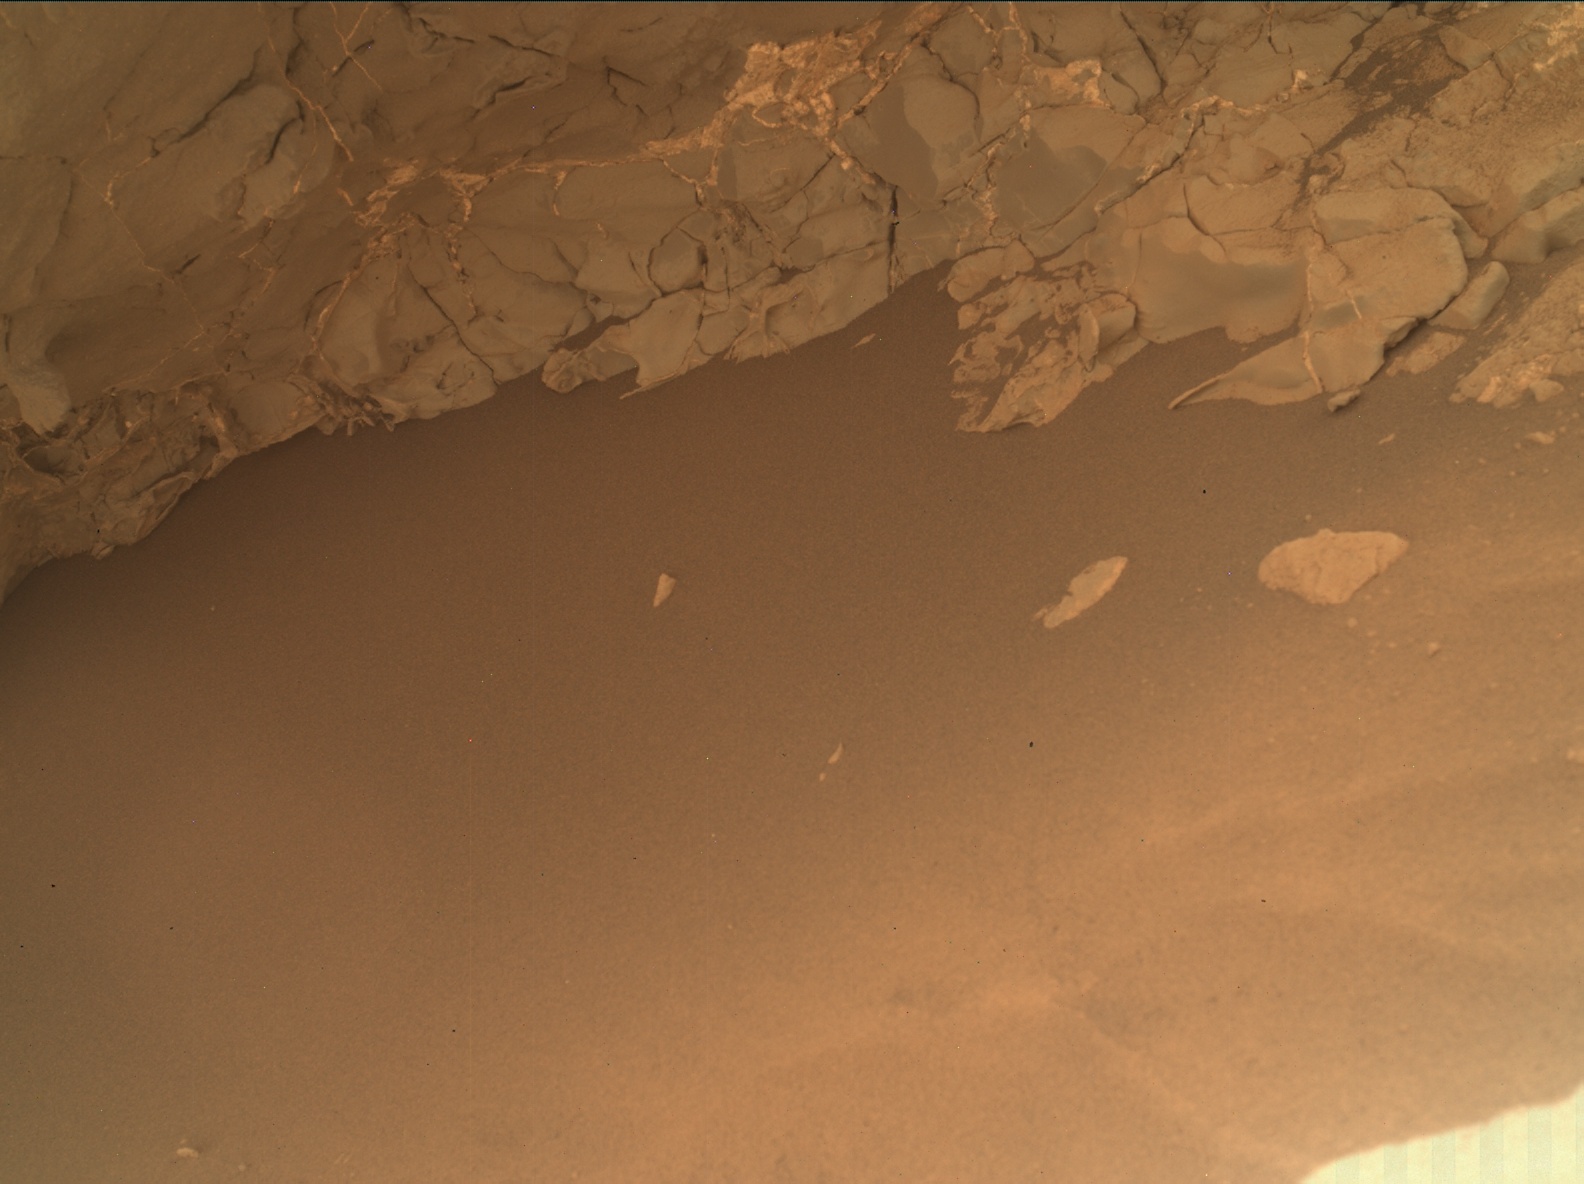 Nasa's Mars rover Curiosity acquired this image using its Mars Hand Lens Imager (MAHLI) on Sol 132